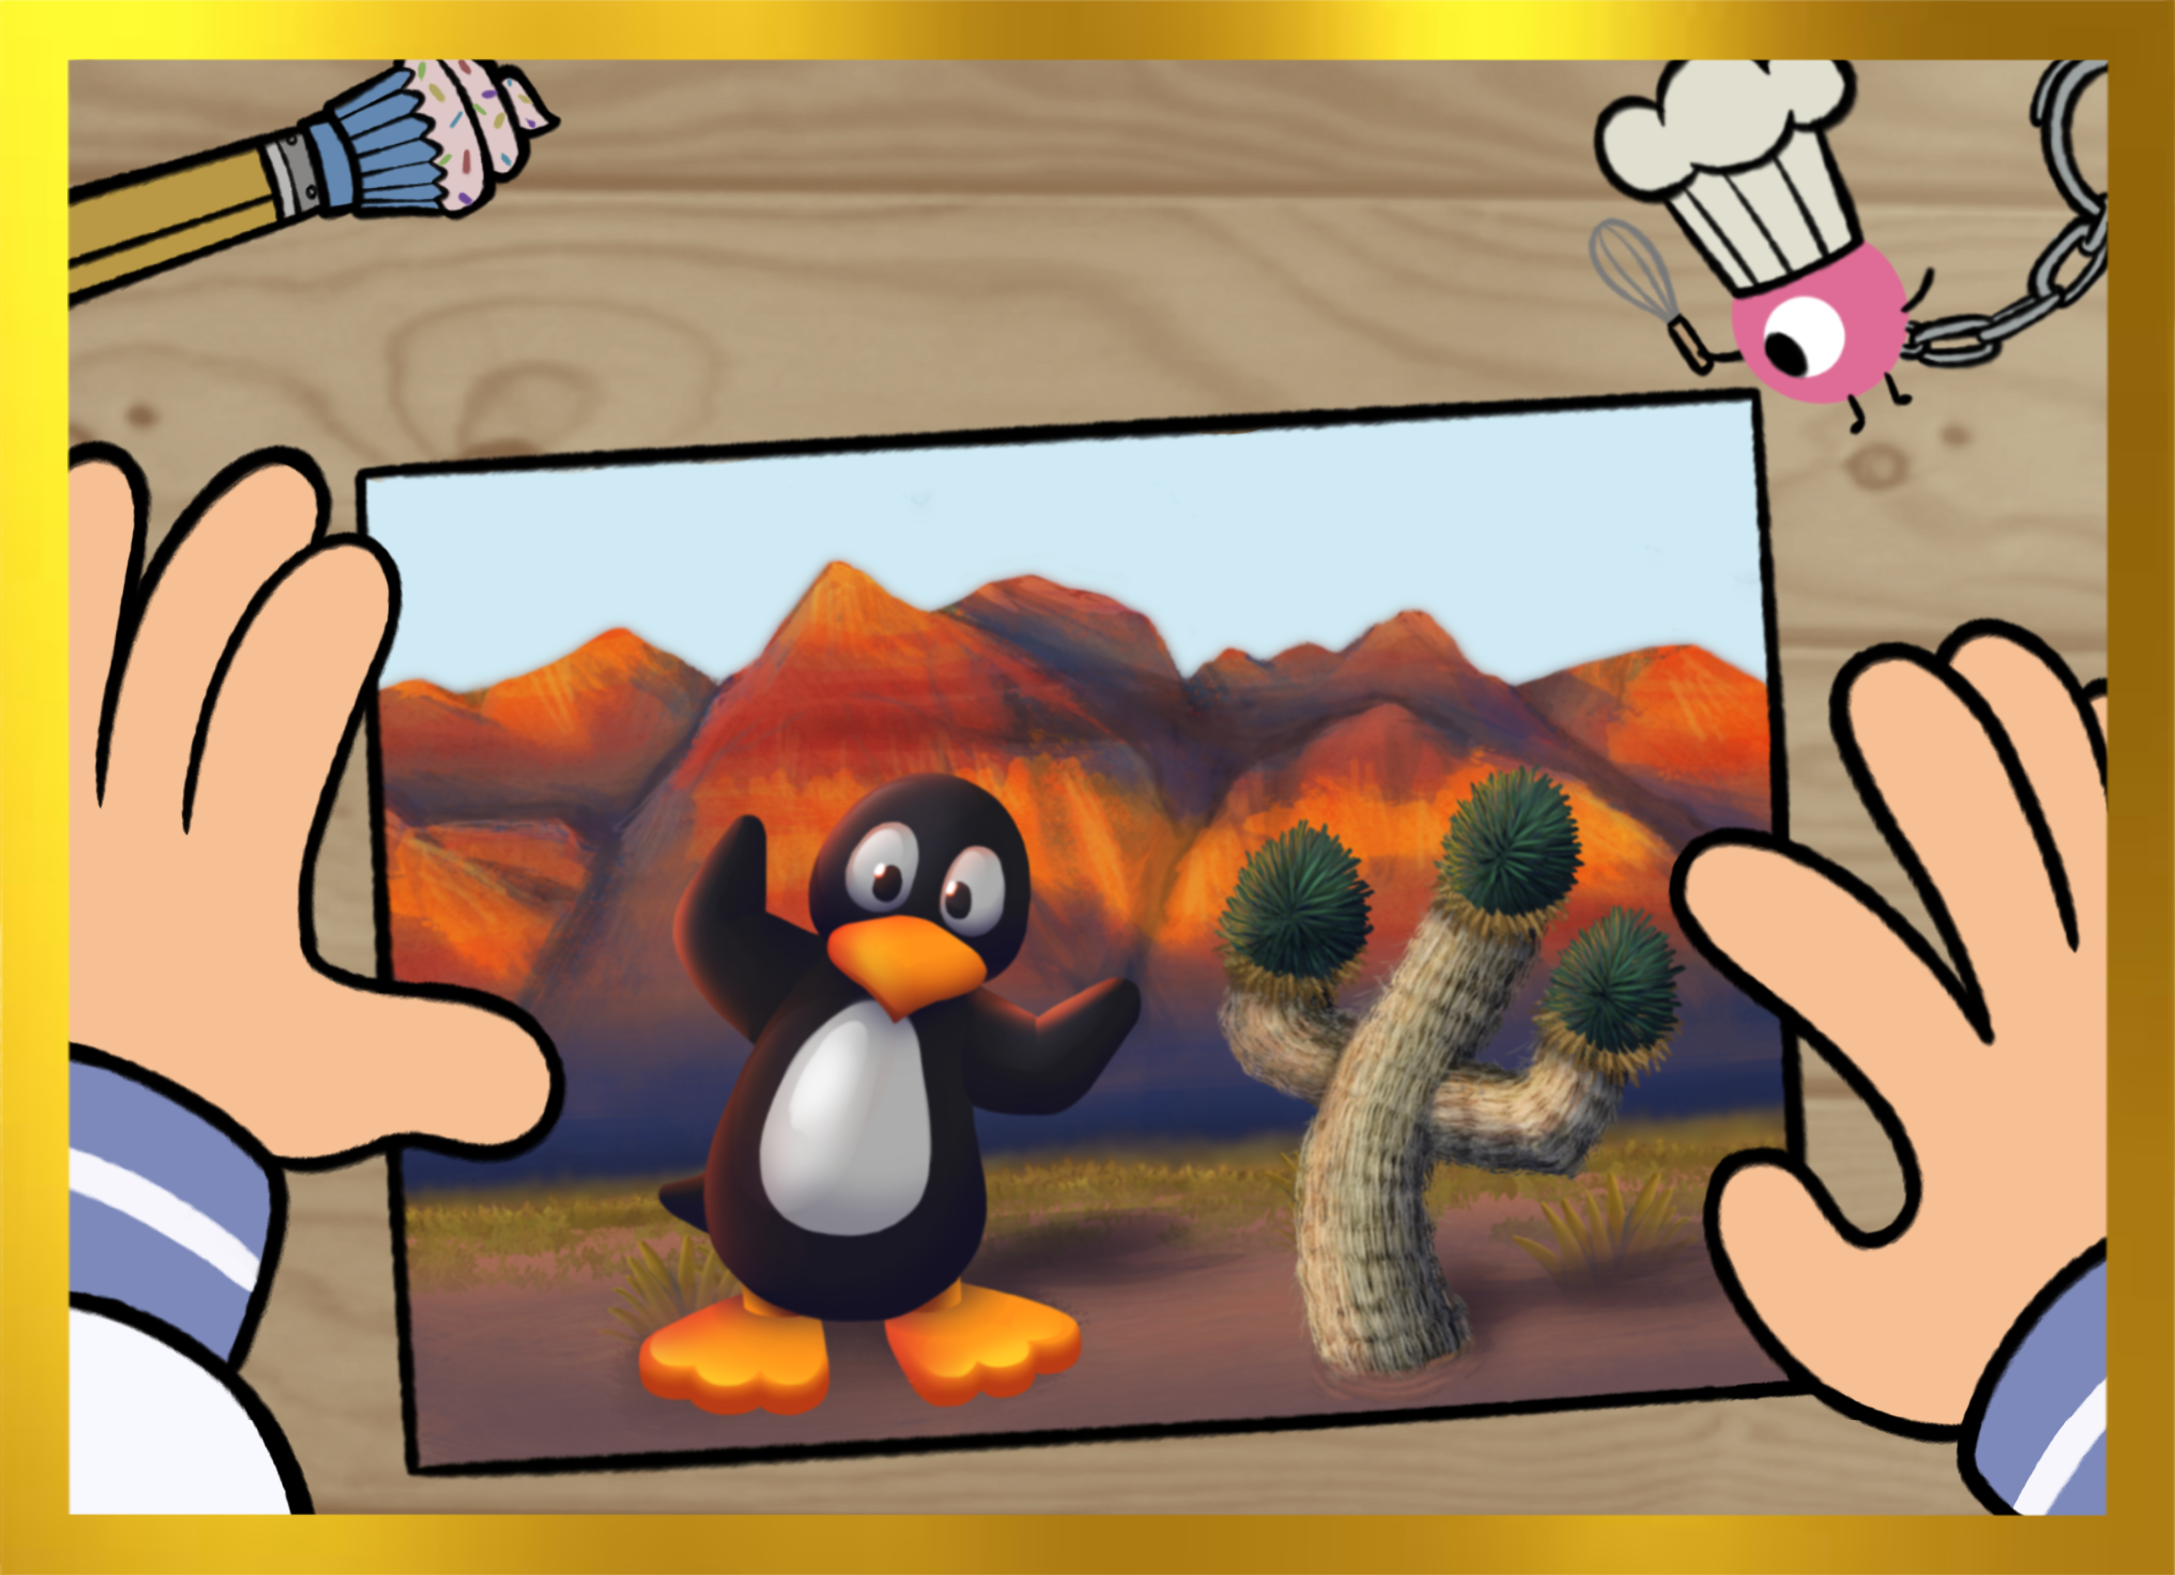 A photo of JiJi standing next to a cactus.  JiJi is holding a pose with their arms in the air to look like the cactus